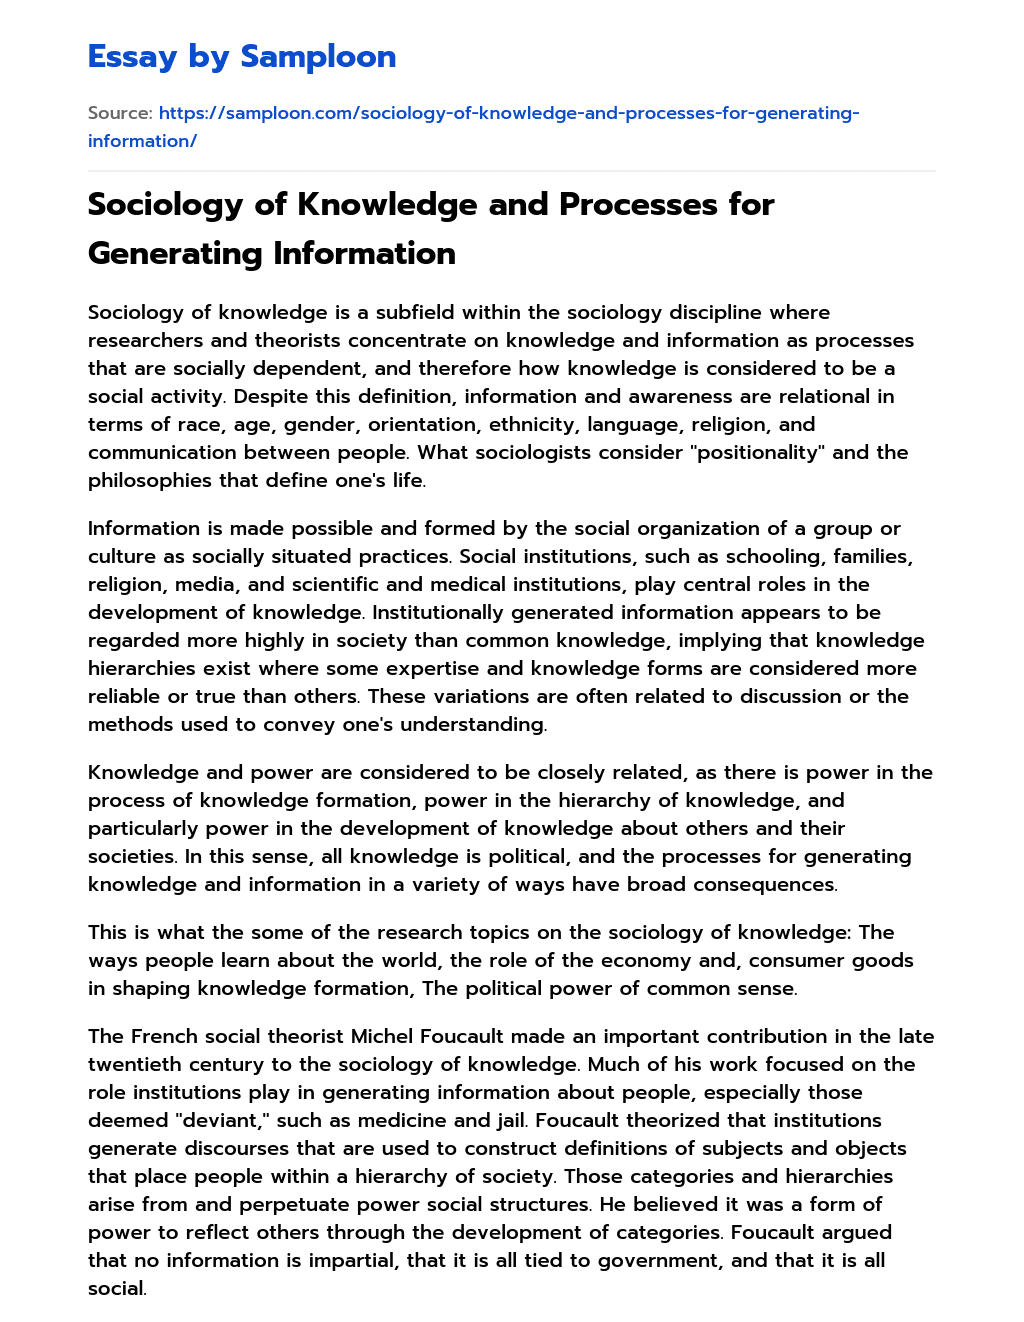 Sociology of Knowledge and Processes for Generating Information essay